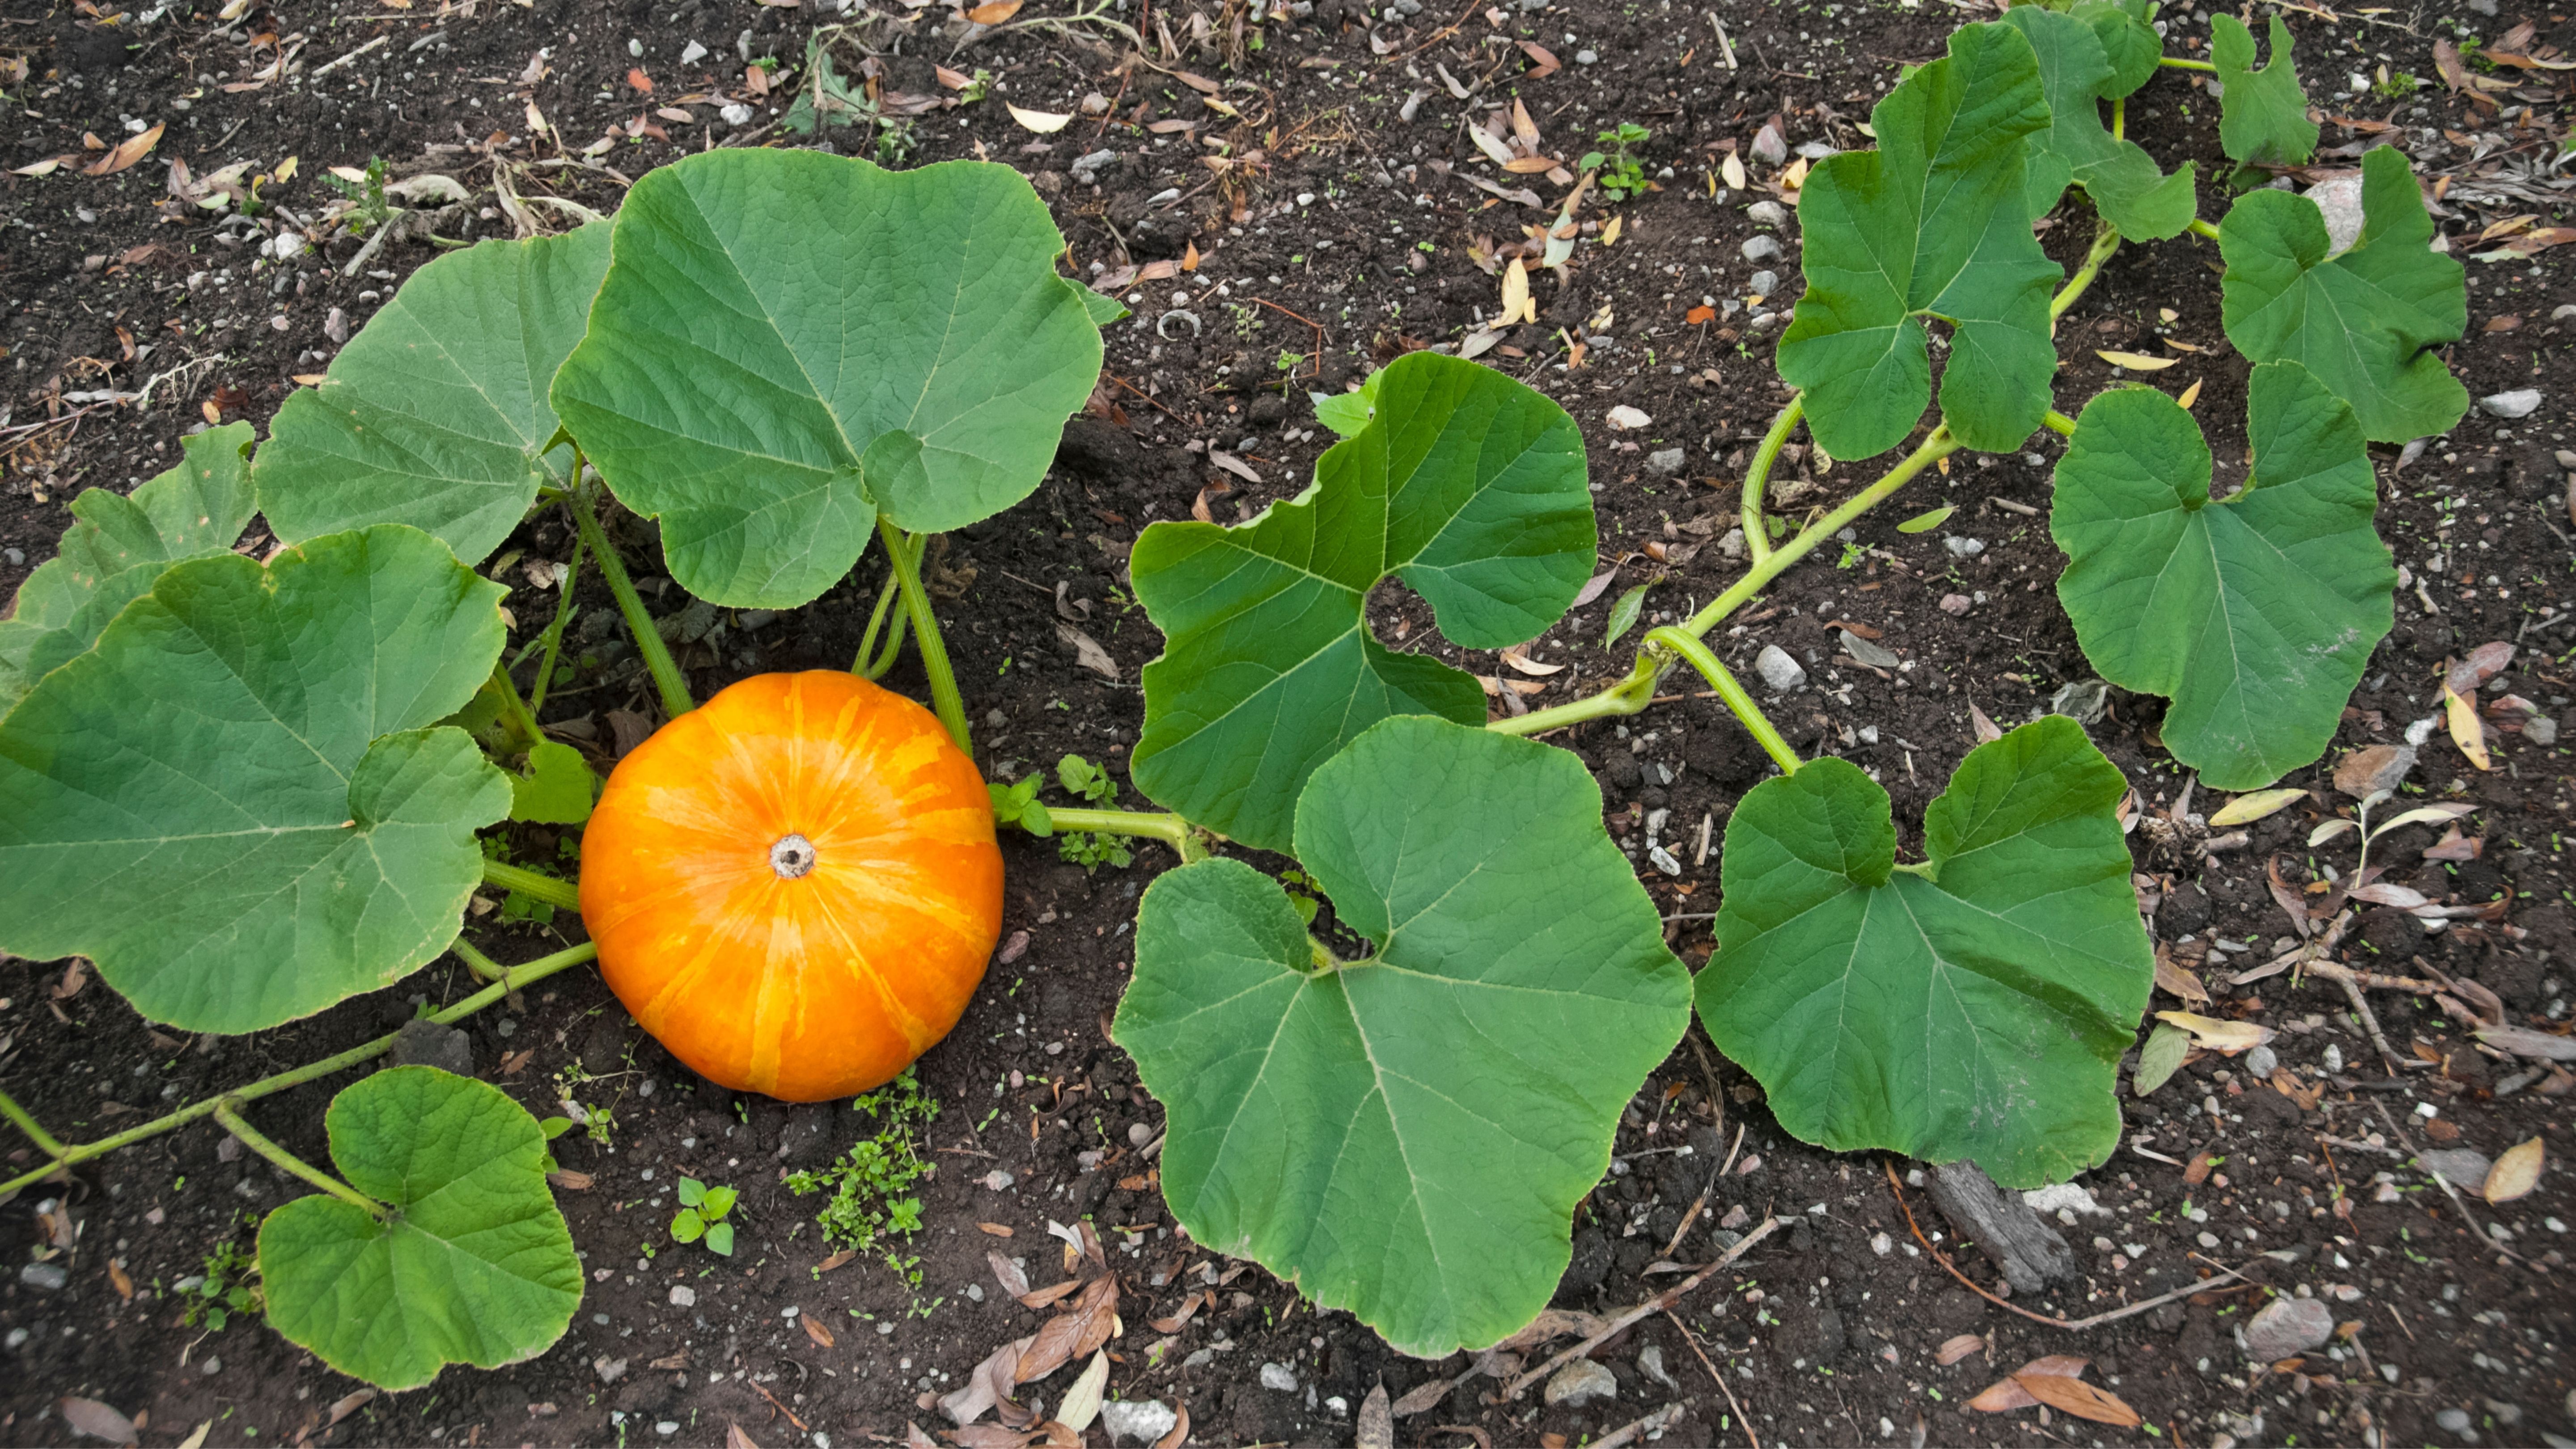 Overview of Squash Pests